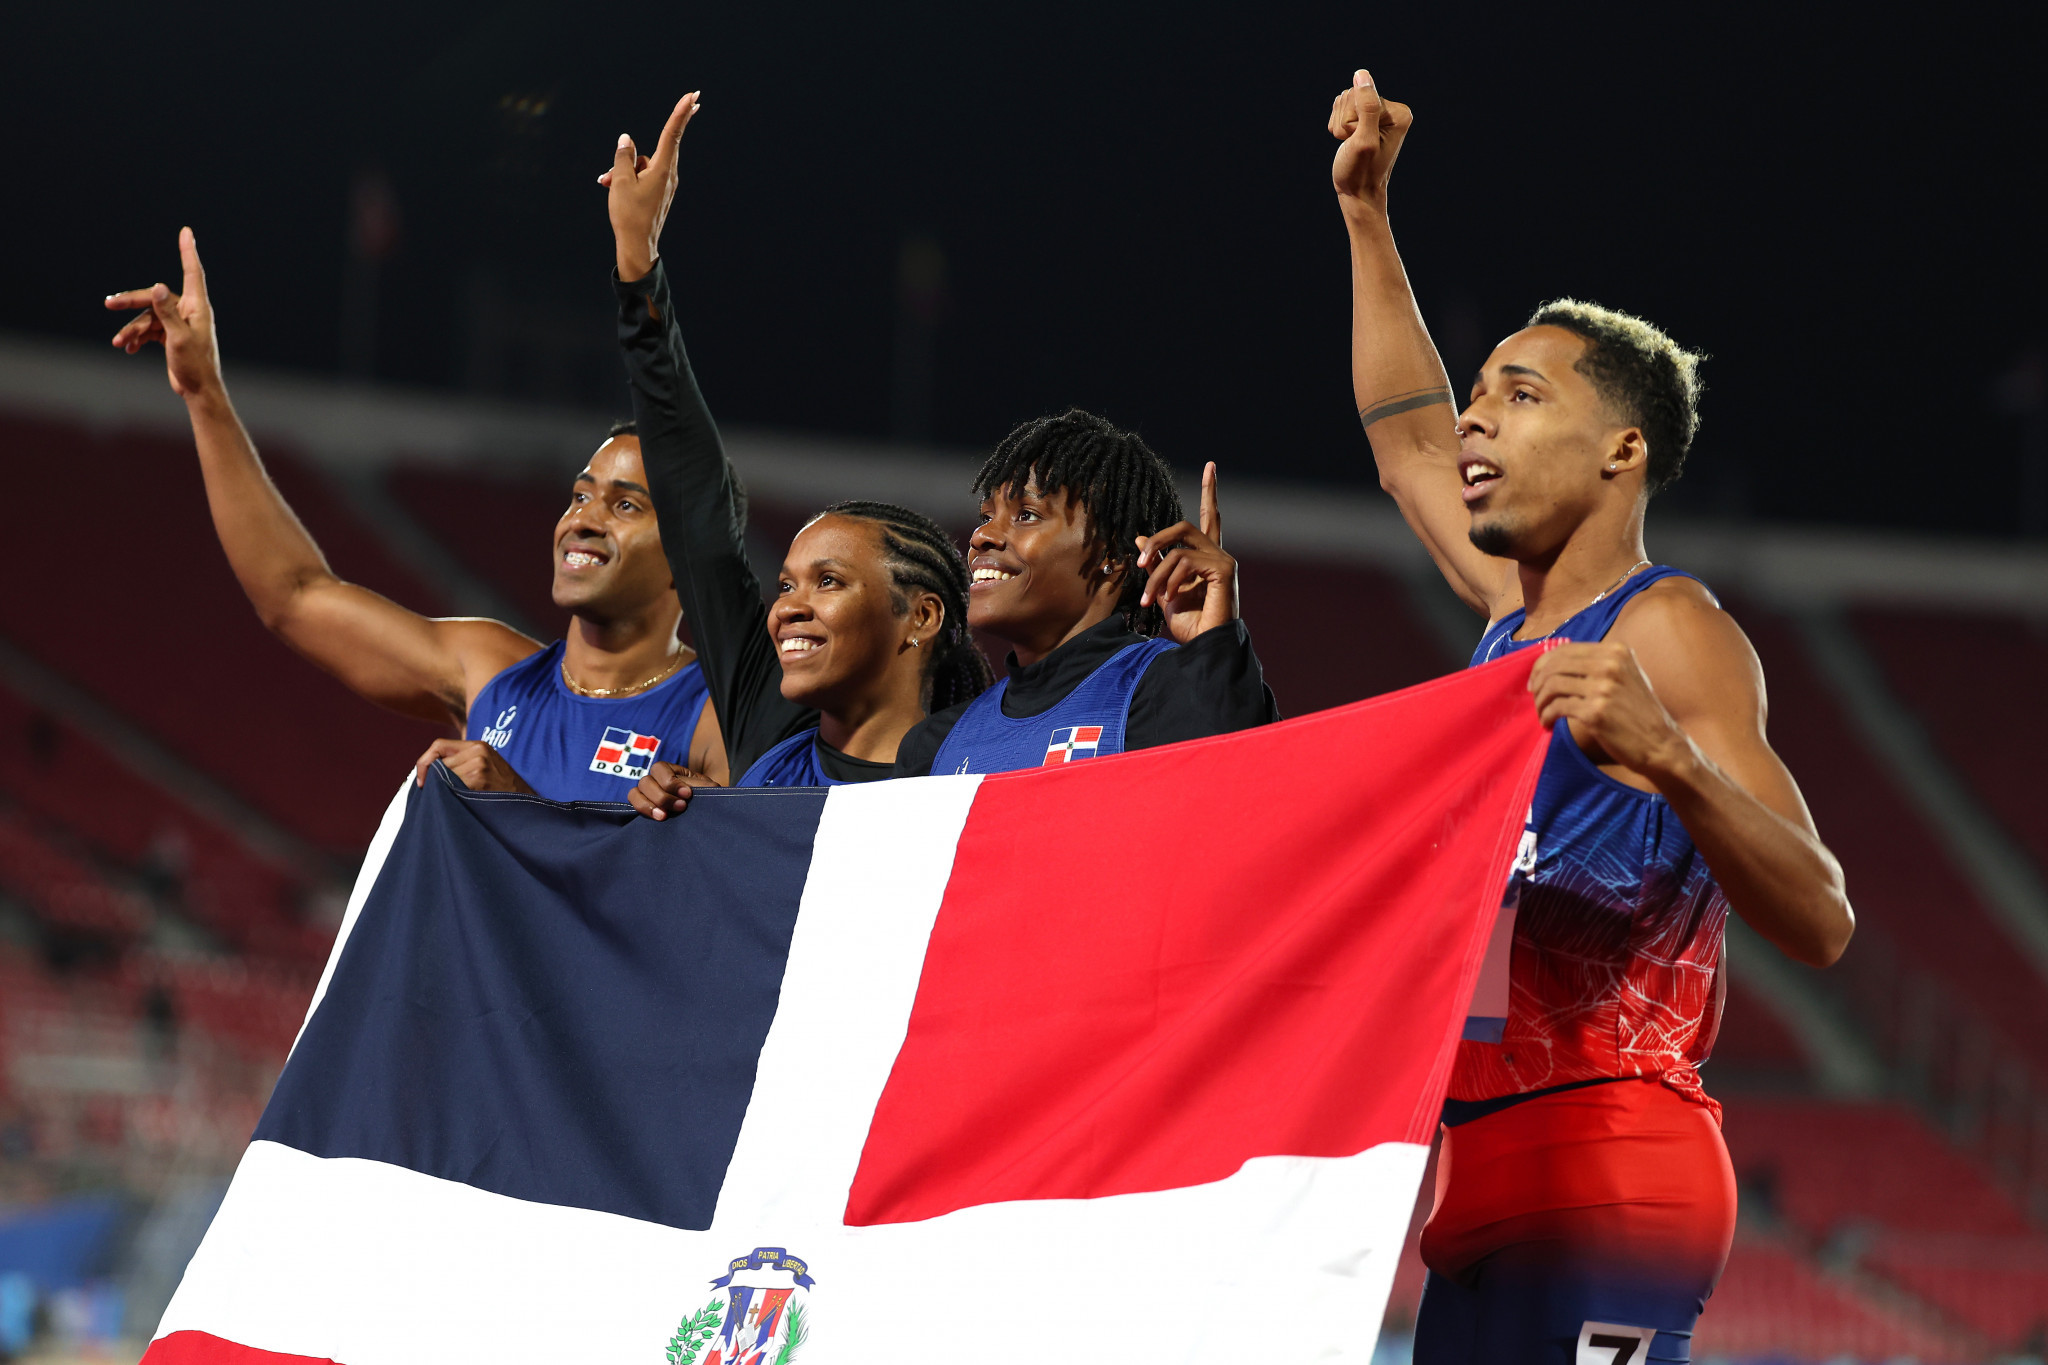 Dominican Republic earned the mixed 4x400m relay gold to finish the first day of track and field athletics at the Pan American Games  ©Getty Images